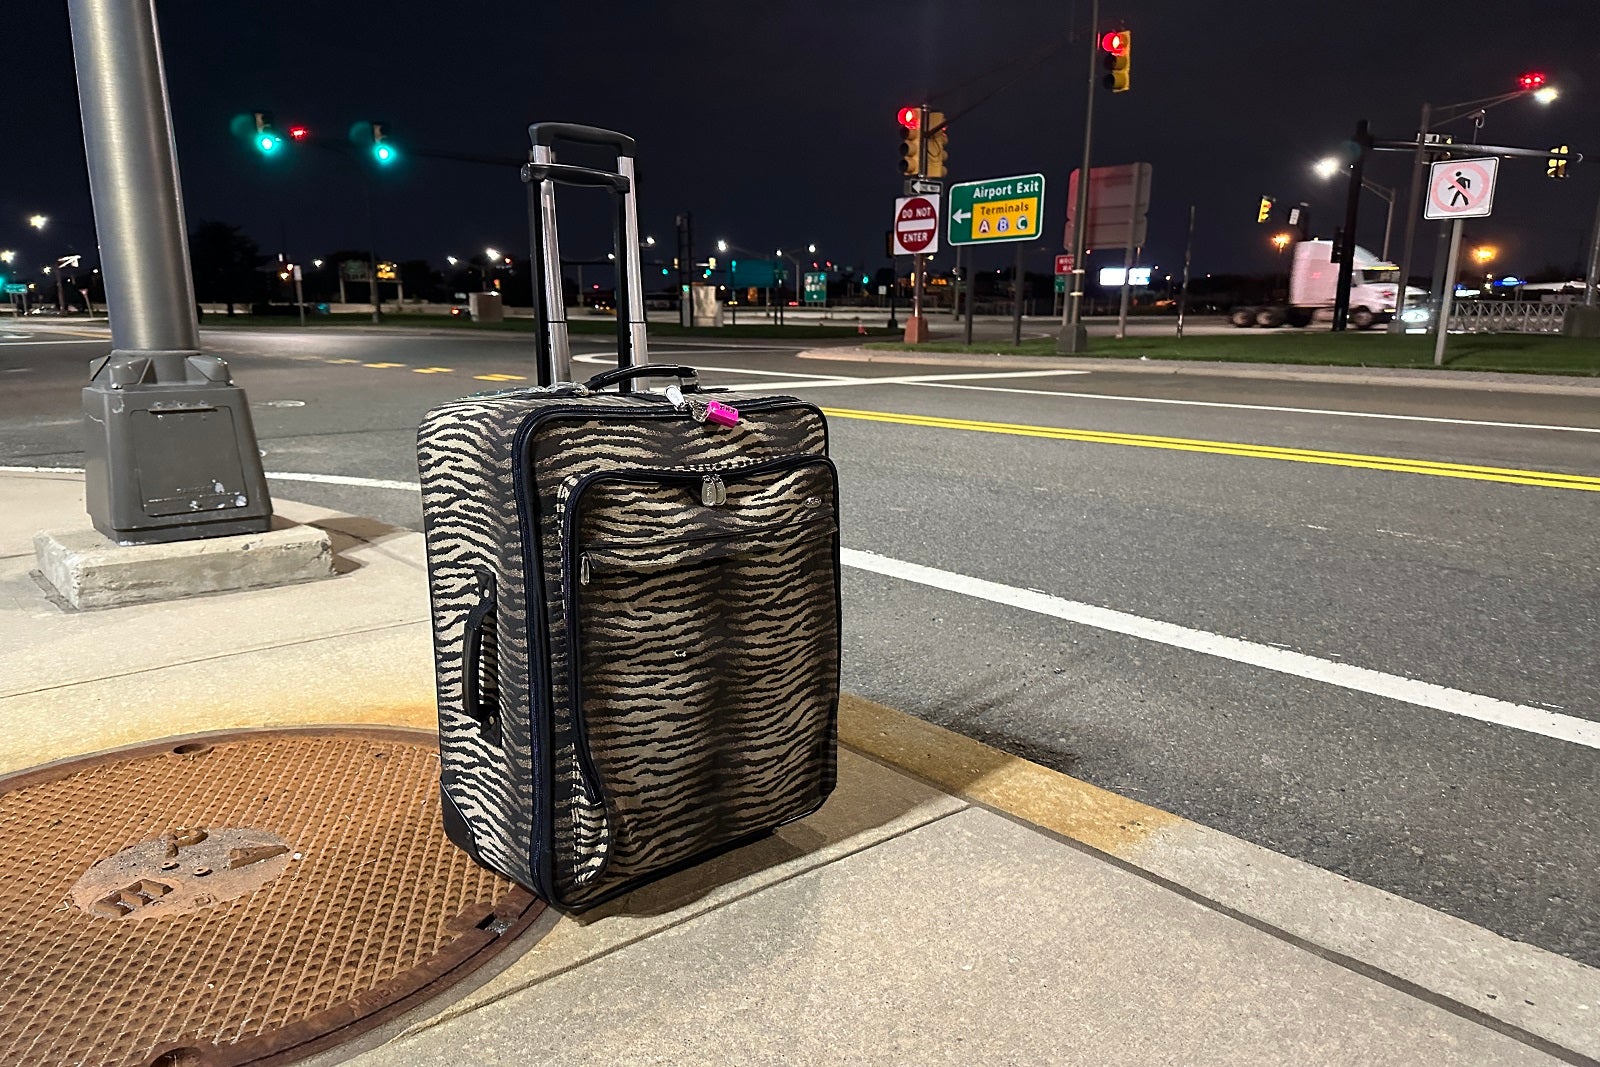 the suitcase next to the road